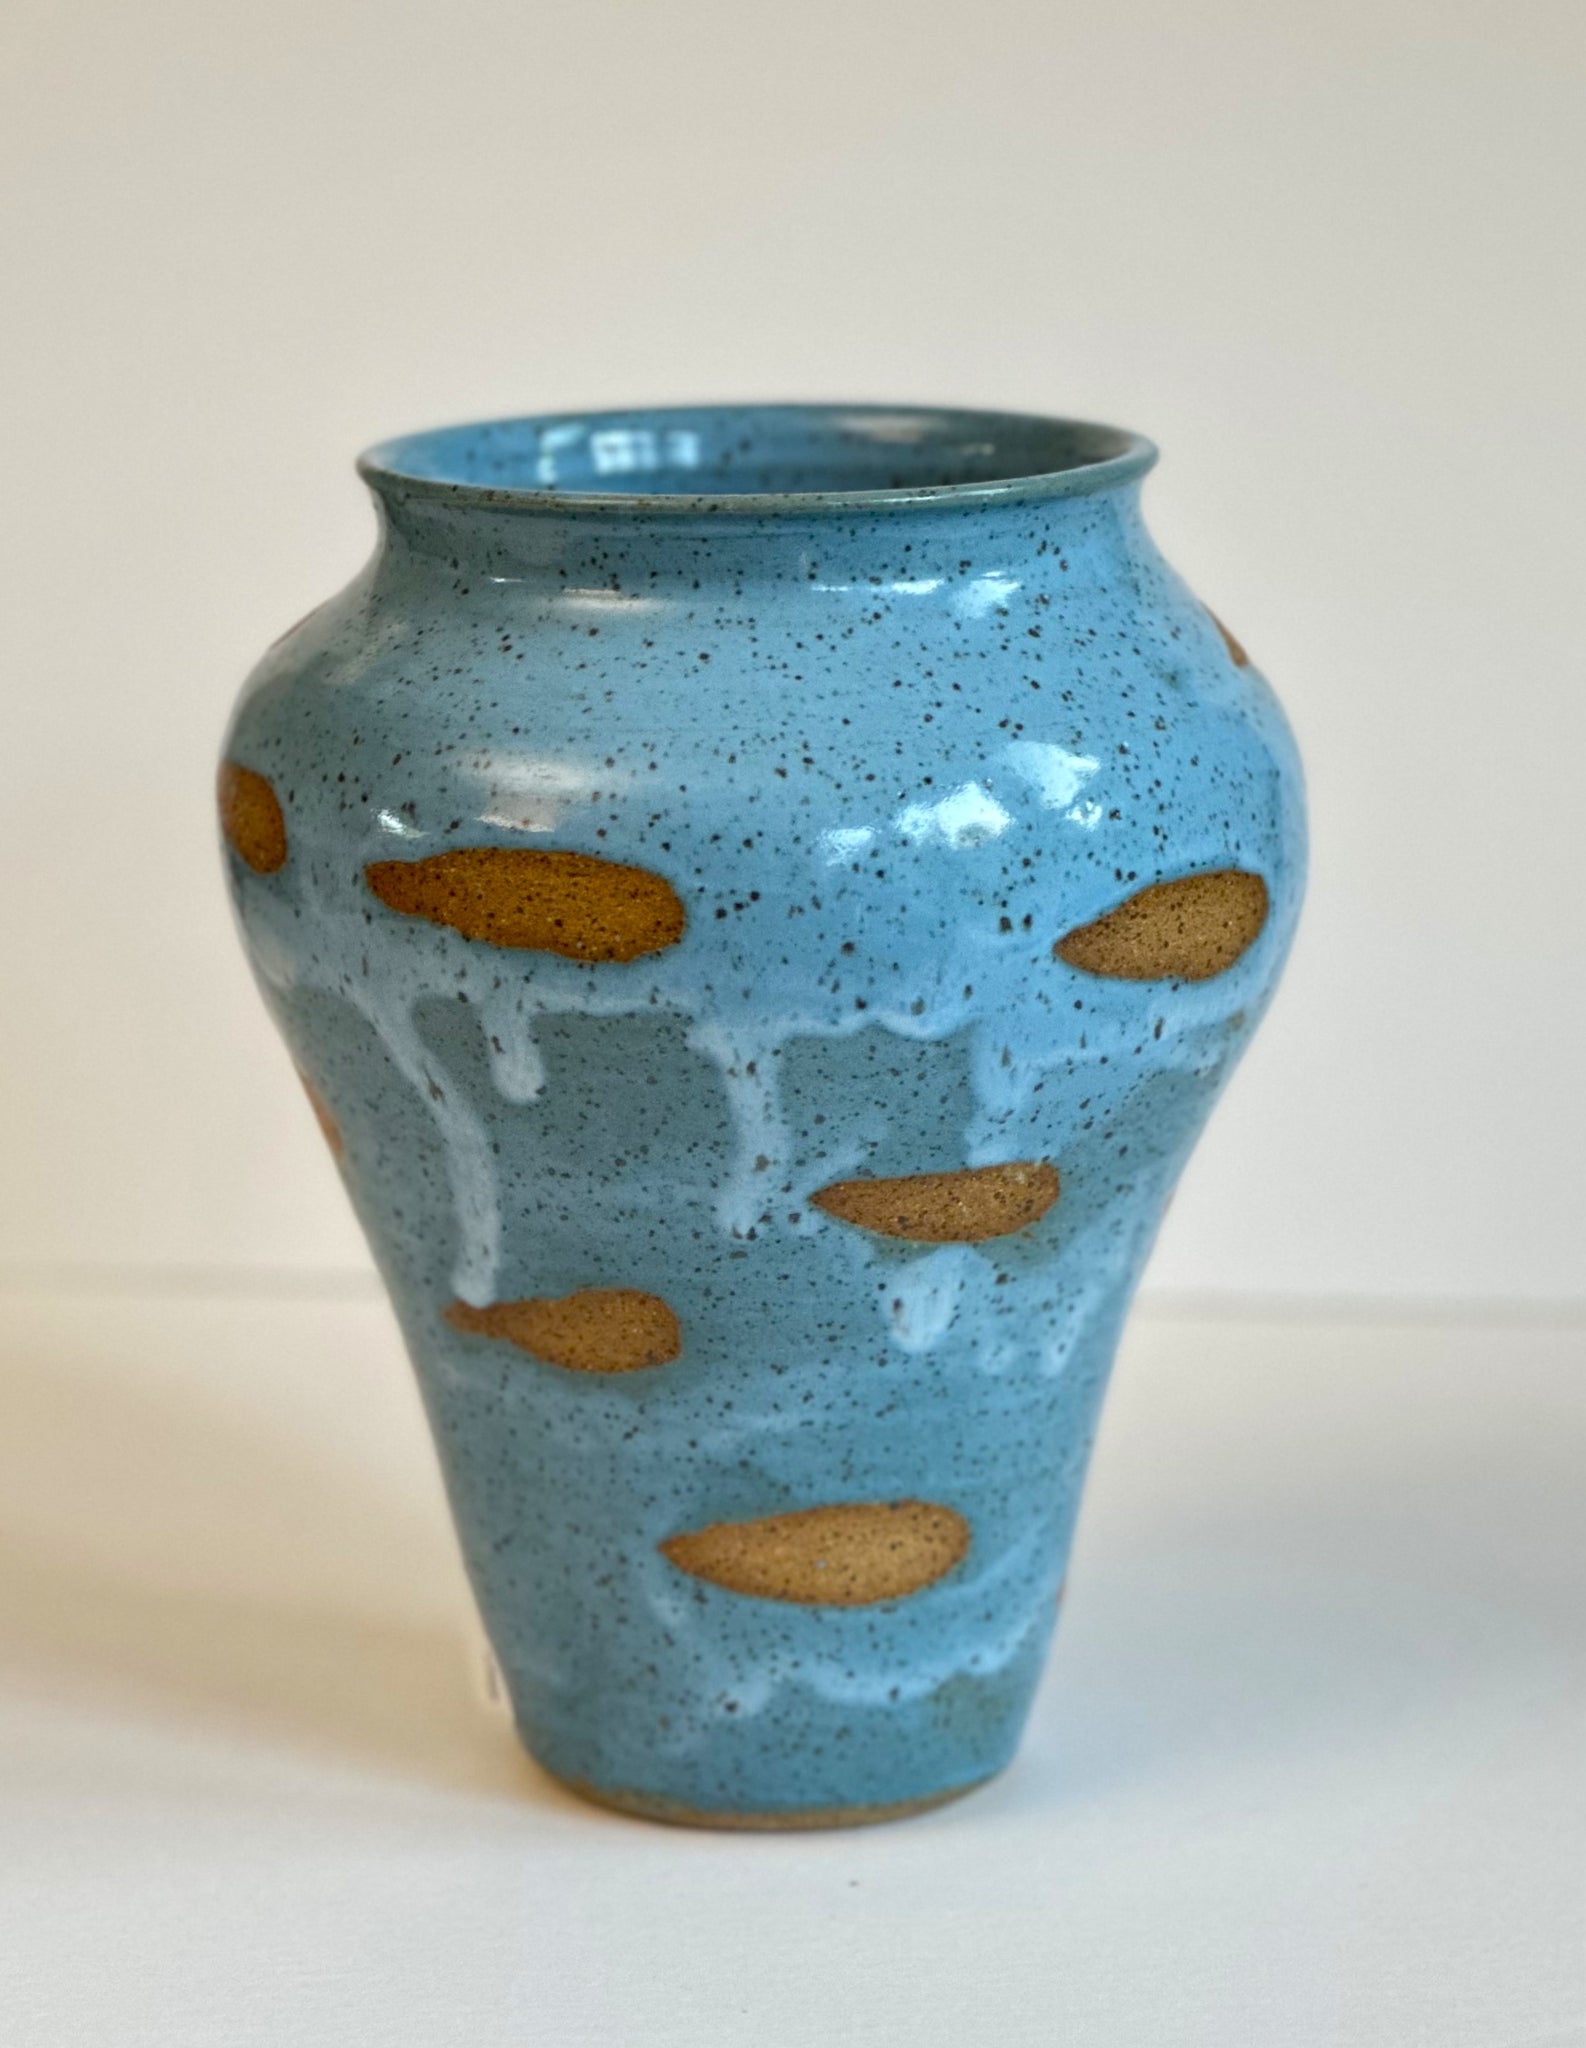 Classic Ginger Jar Turquoise with Wax Resist